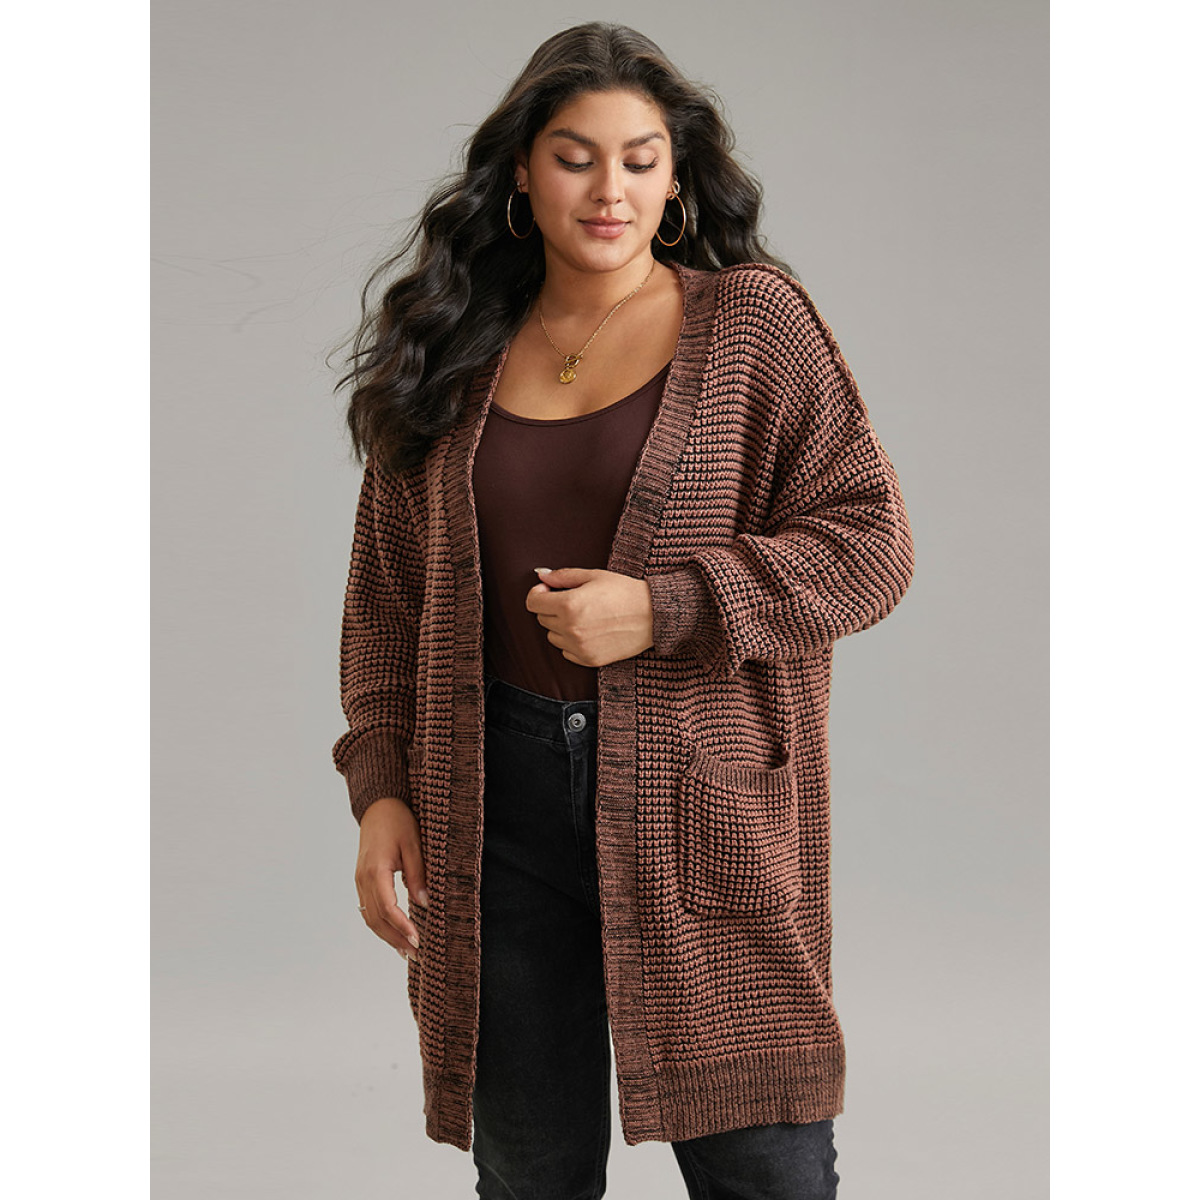 

Plus Size Plisse Plain Patched Pocket Tunic Cardigan DarkBrown Women Casual Loose Long Sleeve Dailywear Cardigans BloomChic